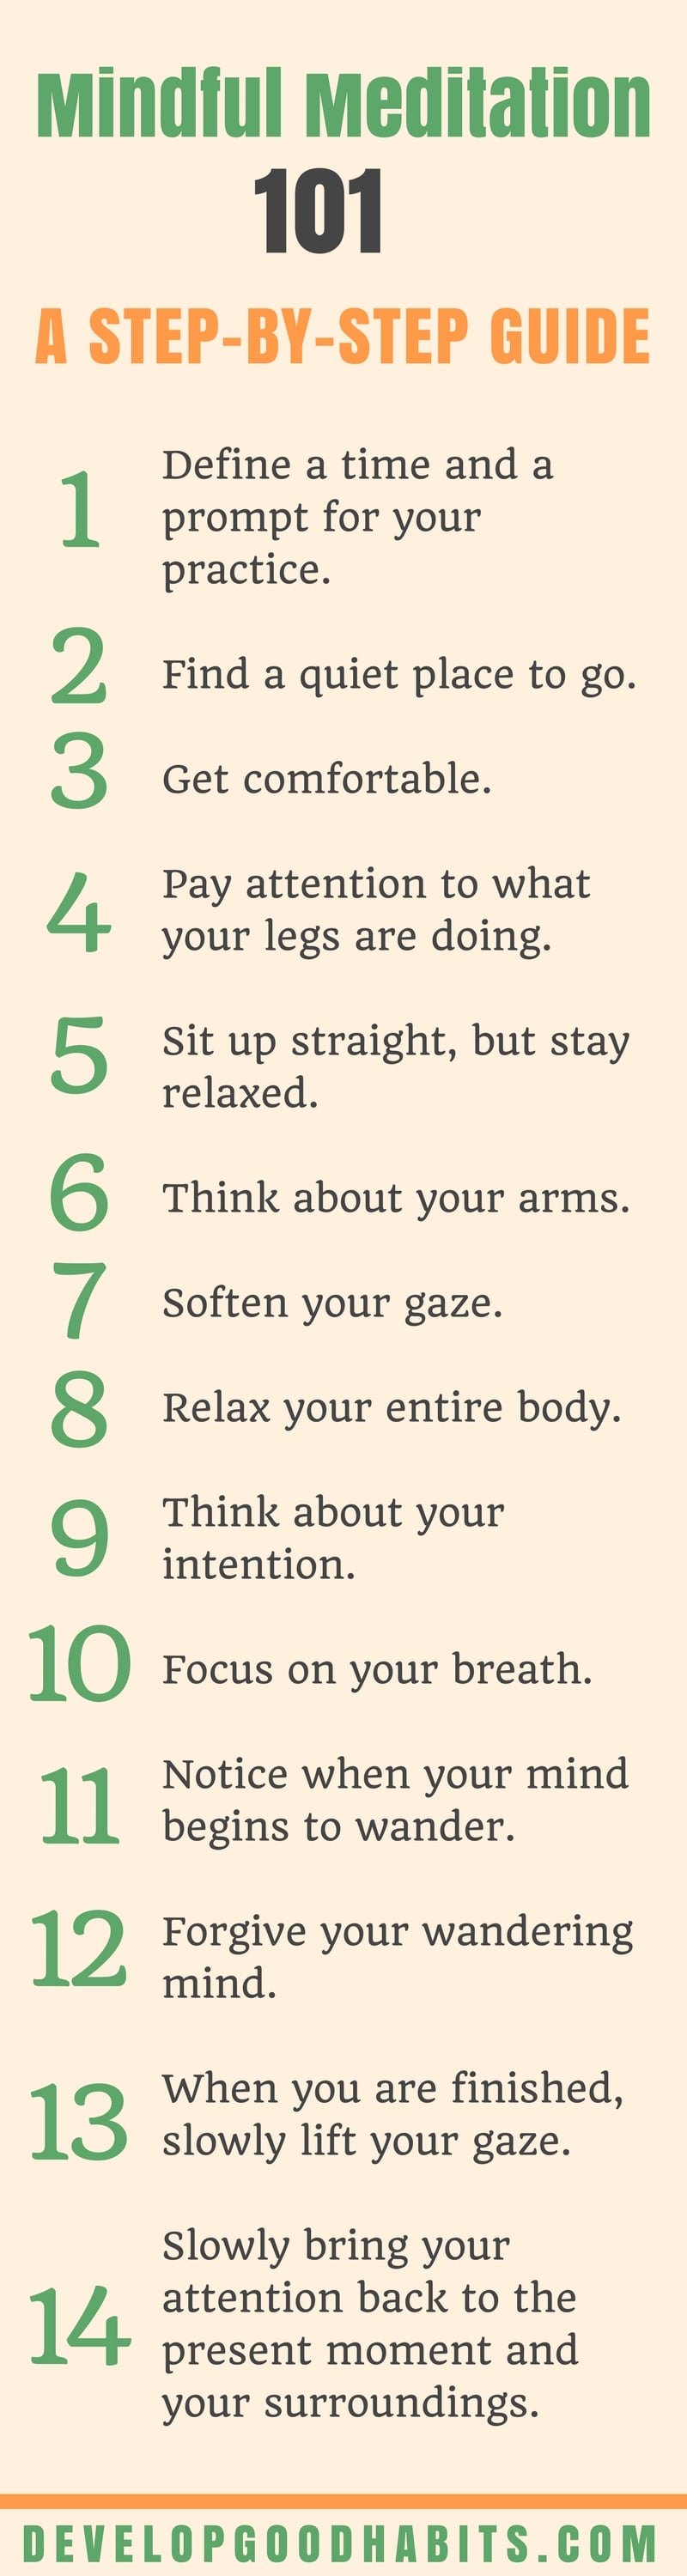 Mindful Meditation 101: A Step-by-Step Guide